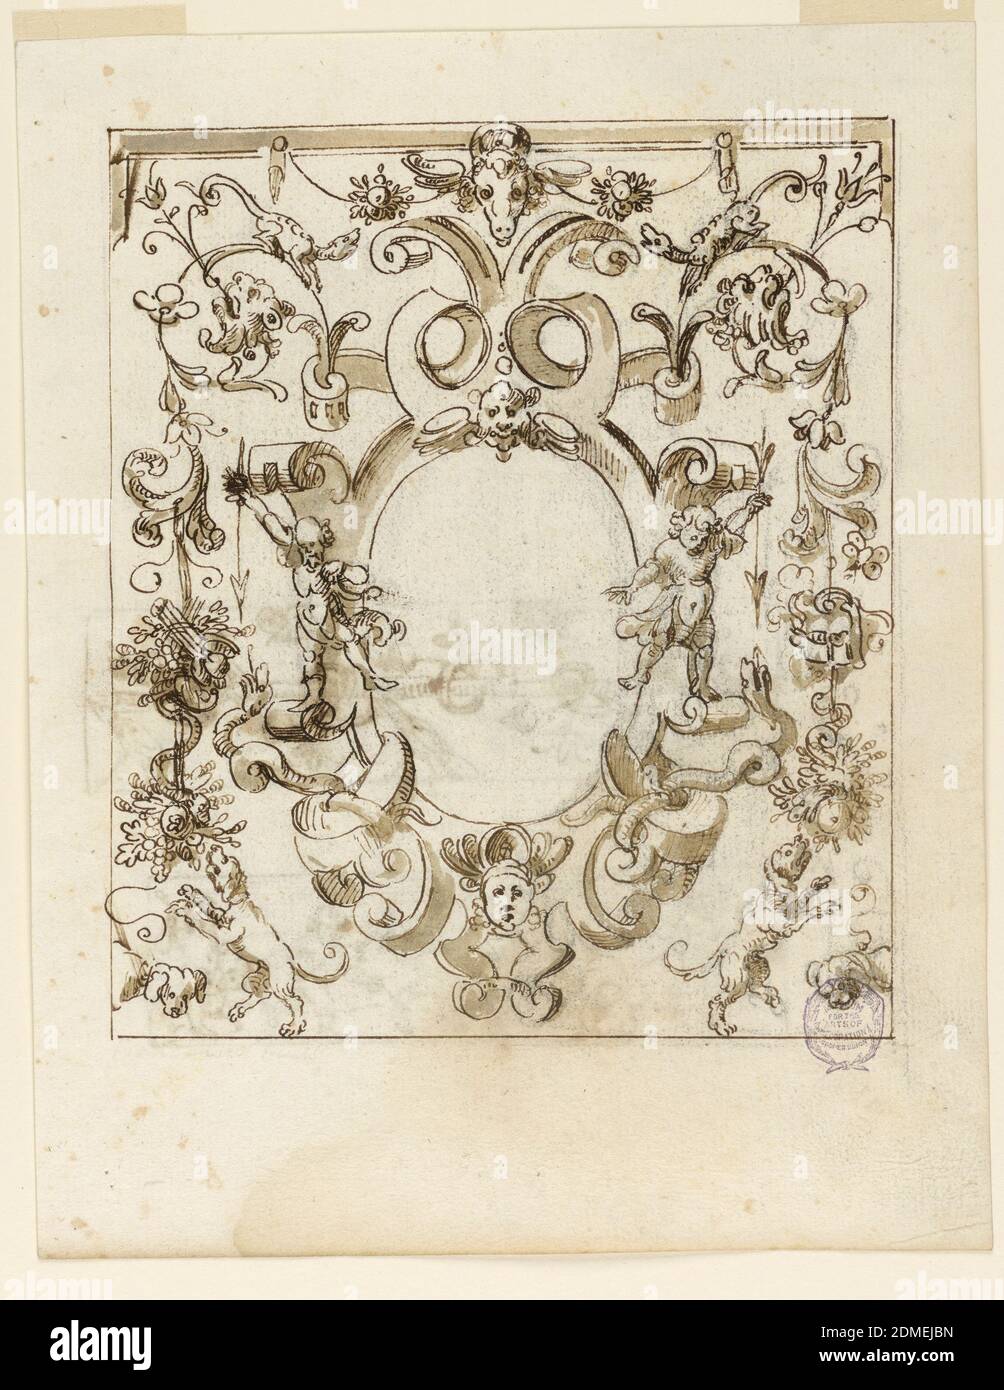 Grotesque Design, Charcoal, pen and ink, brush and watercolor on paper, A grotesque design surrounds a strapwork escutcheon. At bottom, two dogs on their hind legs reach for garlands hanging from trophies. Flanking the blank central panel are two figures., Italy, early 17th century, ornament, Drawing Stock Photo